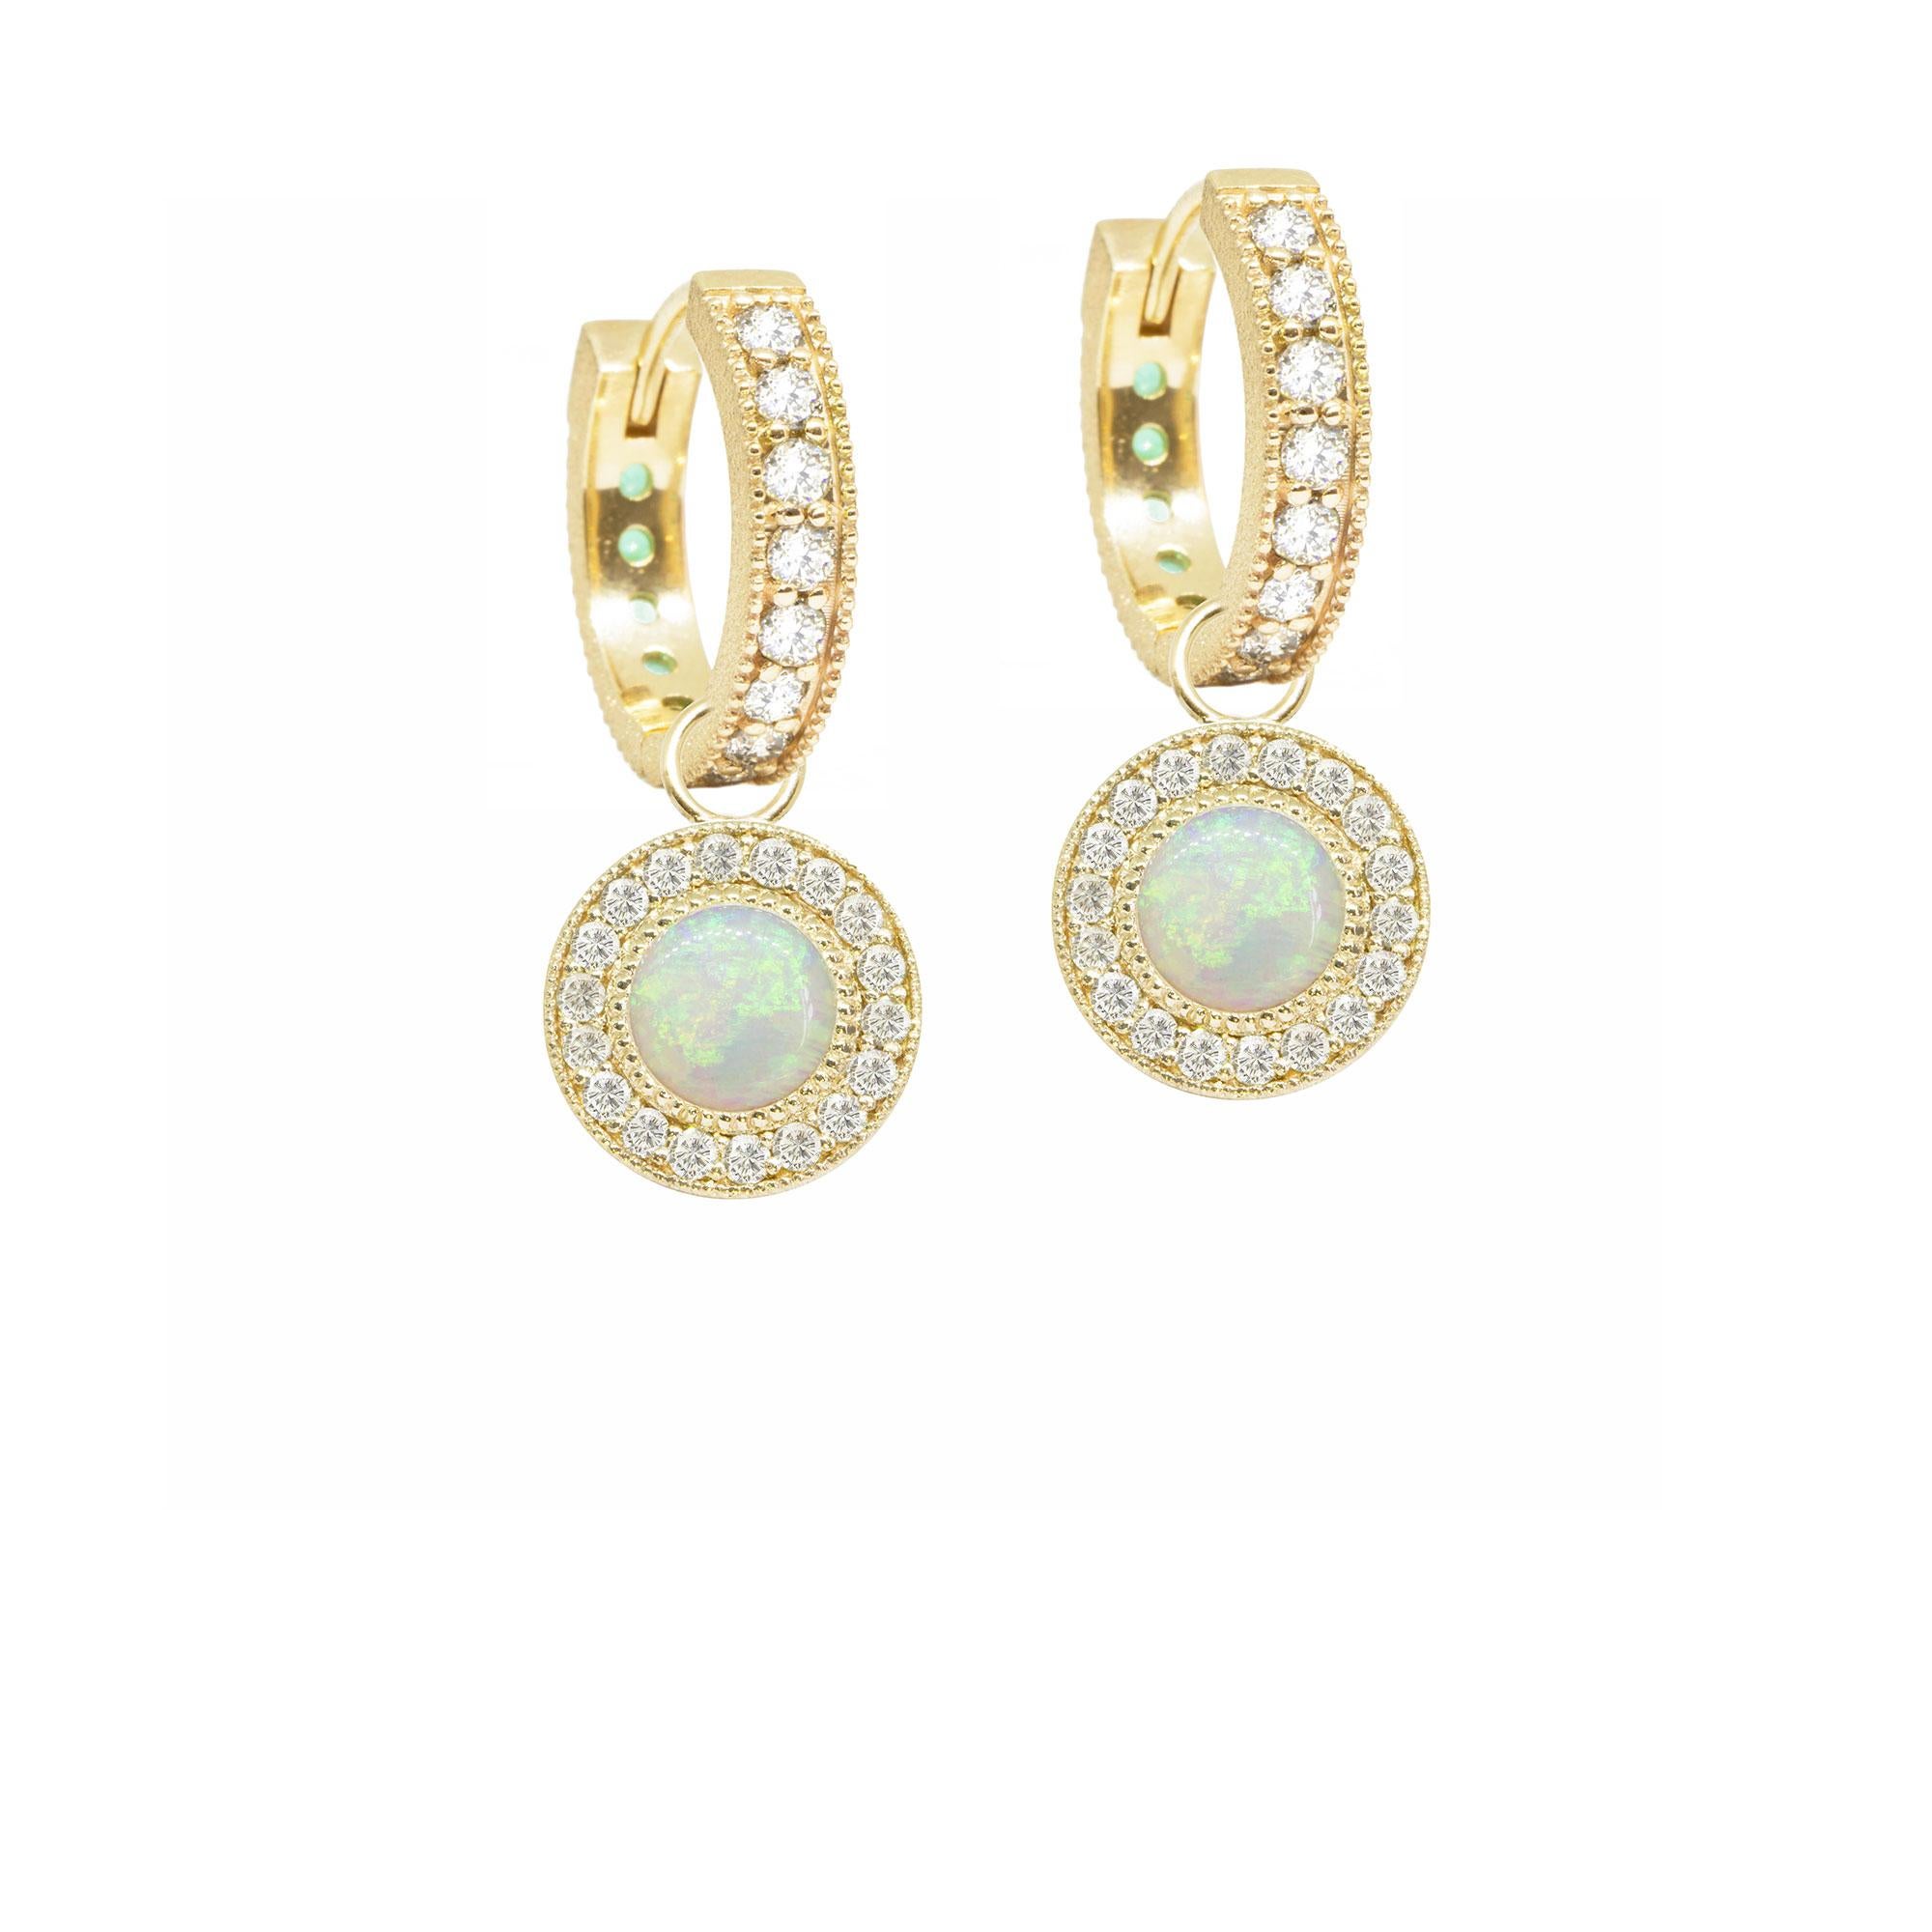 In the Diamond Orbit Gold Charms, concentric circles of engraved gold and pavé diamonds surround white opal cabochons for a cool mix of textures and lusters. They pair with any of our hoops and mix well with other styles.

Nina Nguyen Design's